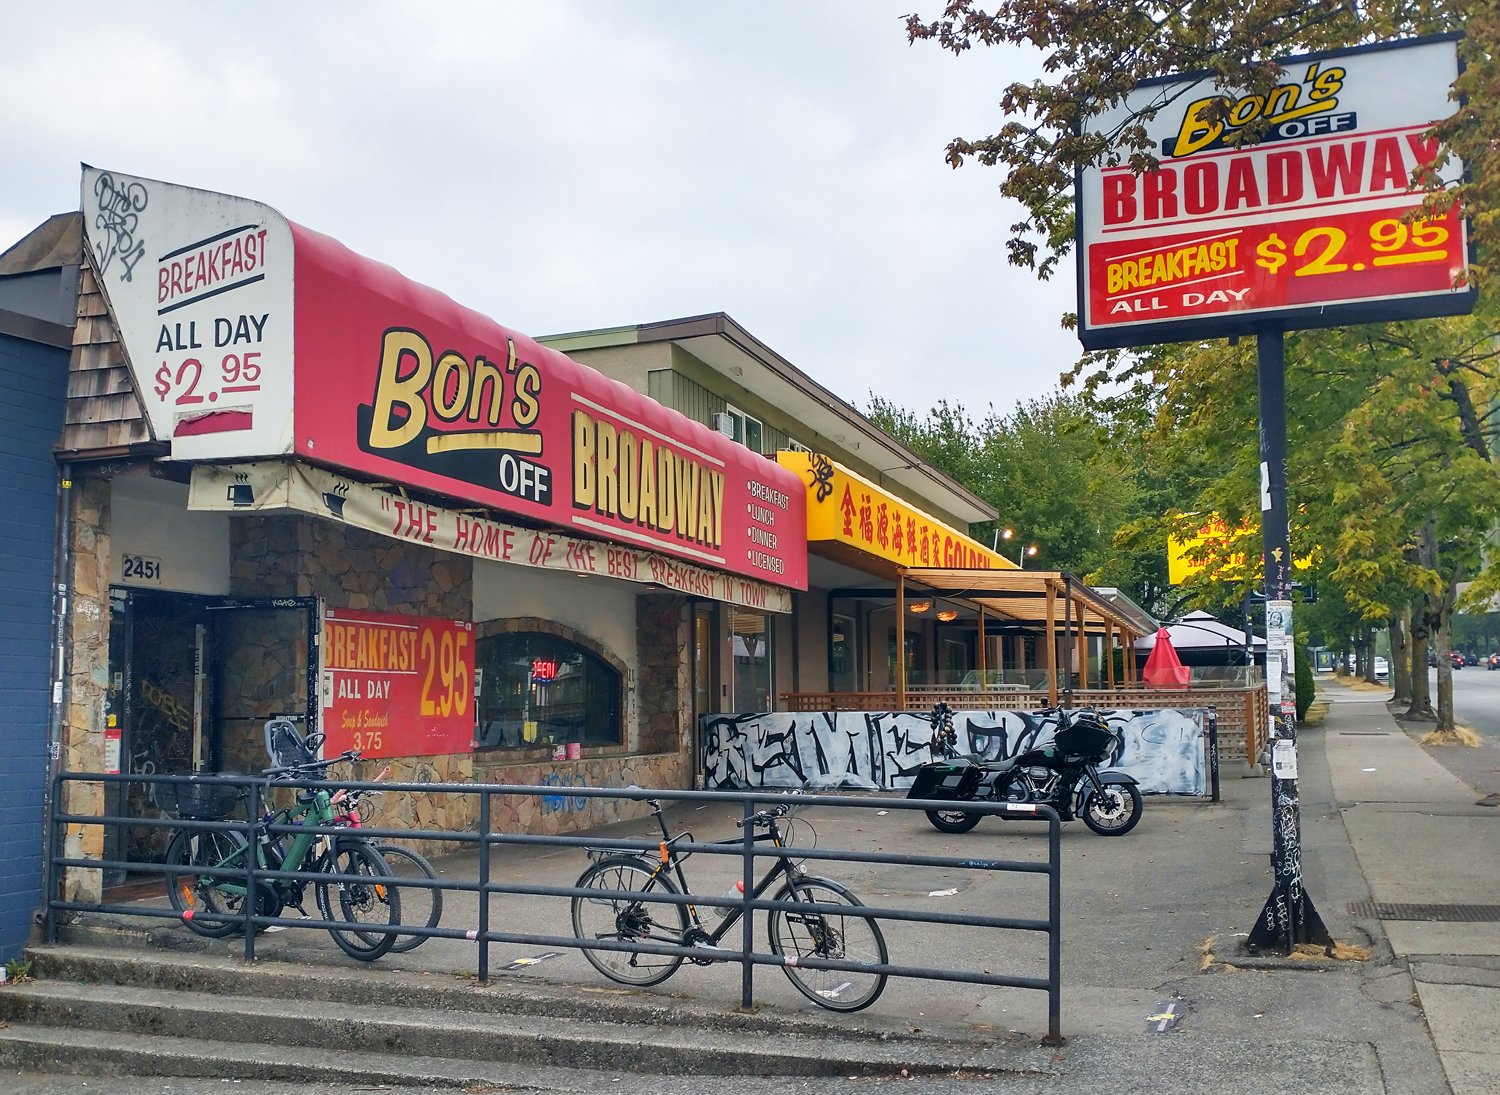 Best part of Vancouver was eating at this place every morning.